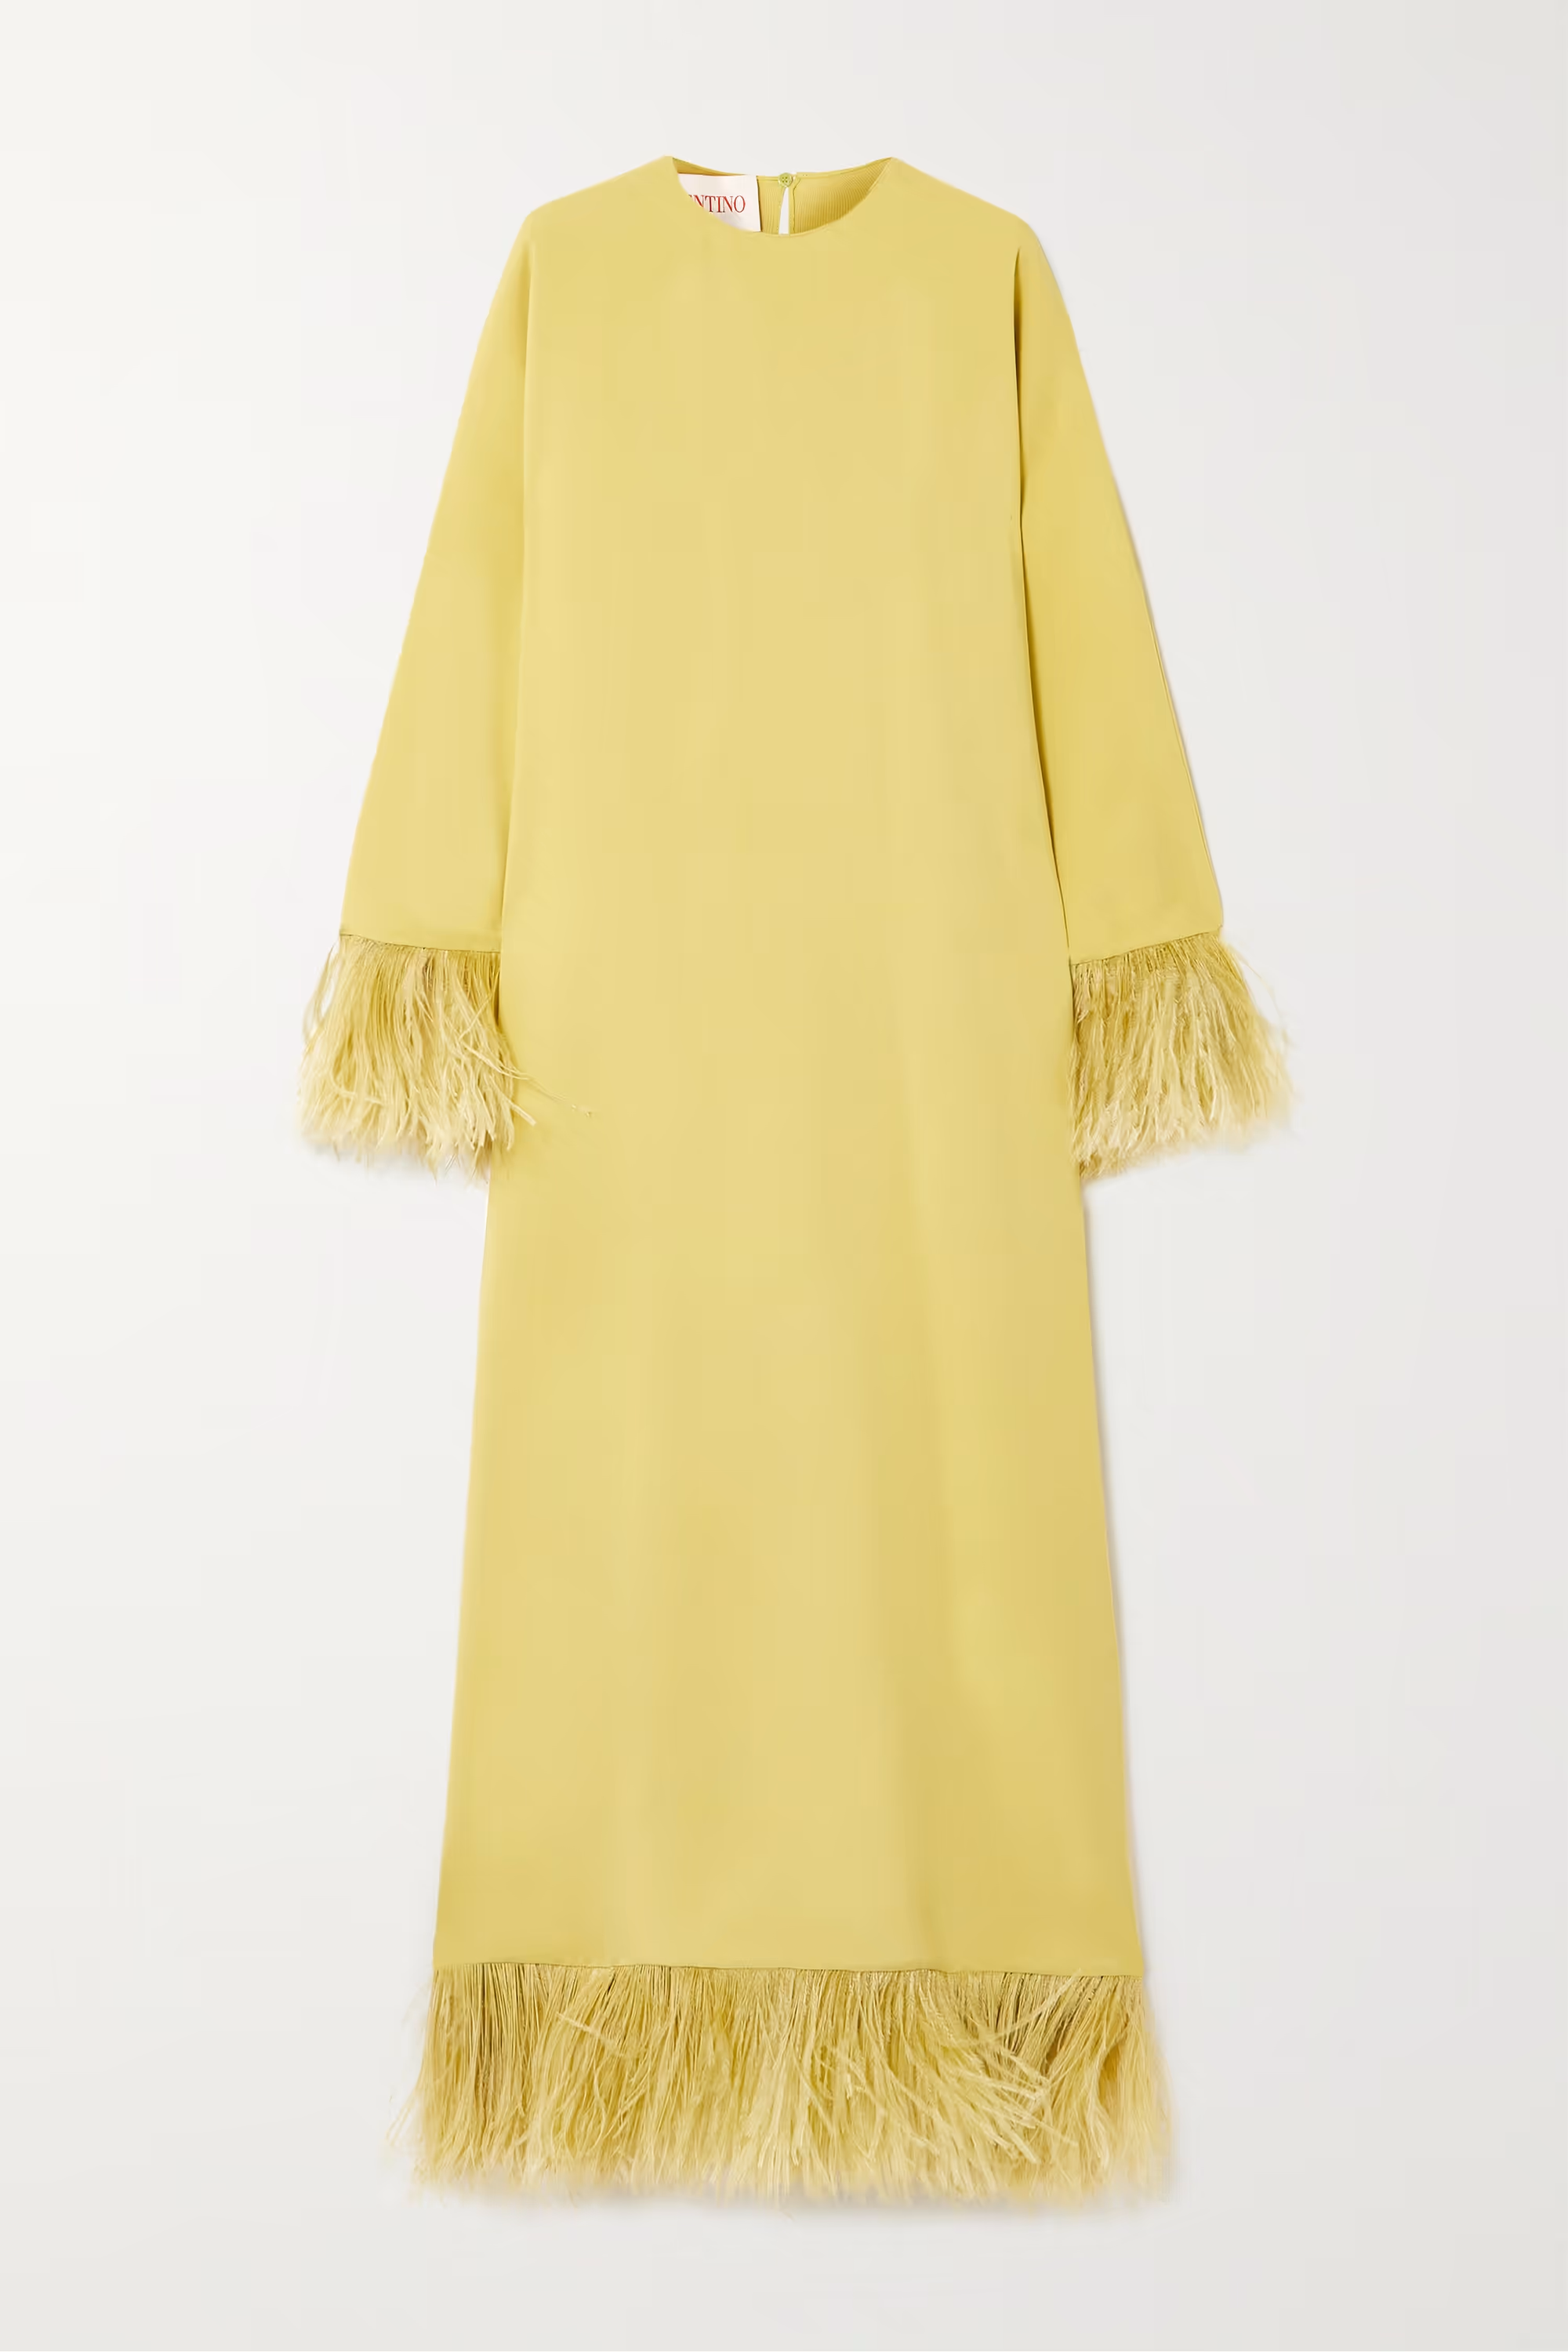 Valentino Feather-Trimmed Silk-Crepe Maxi Dress, £4,200